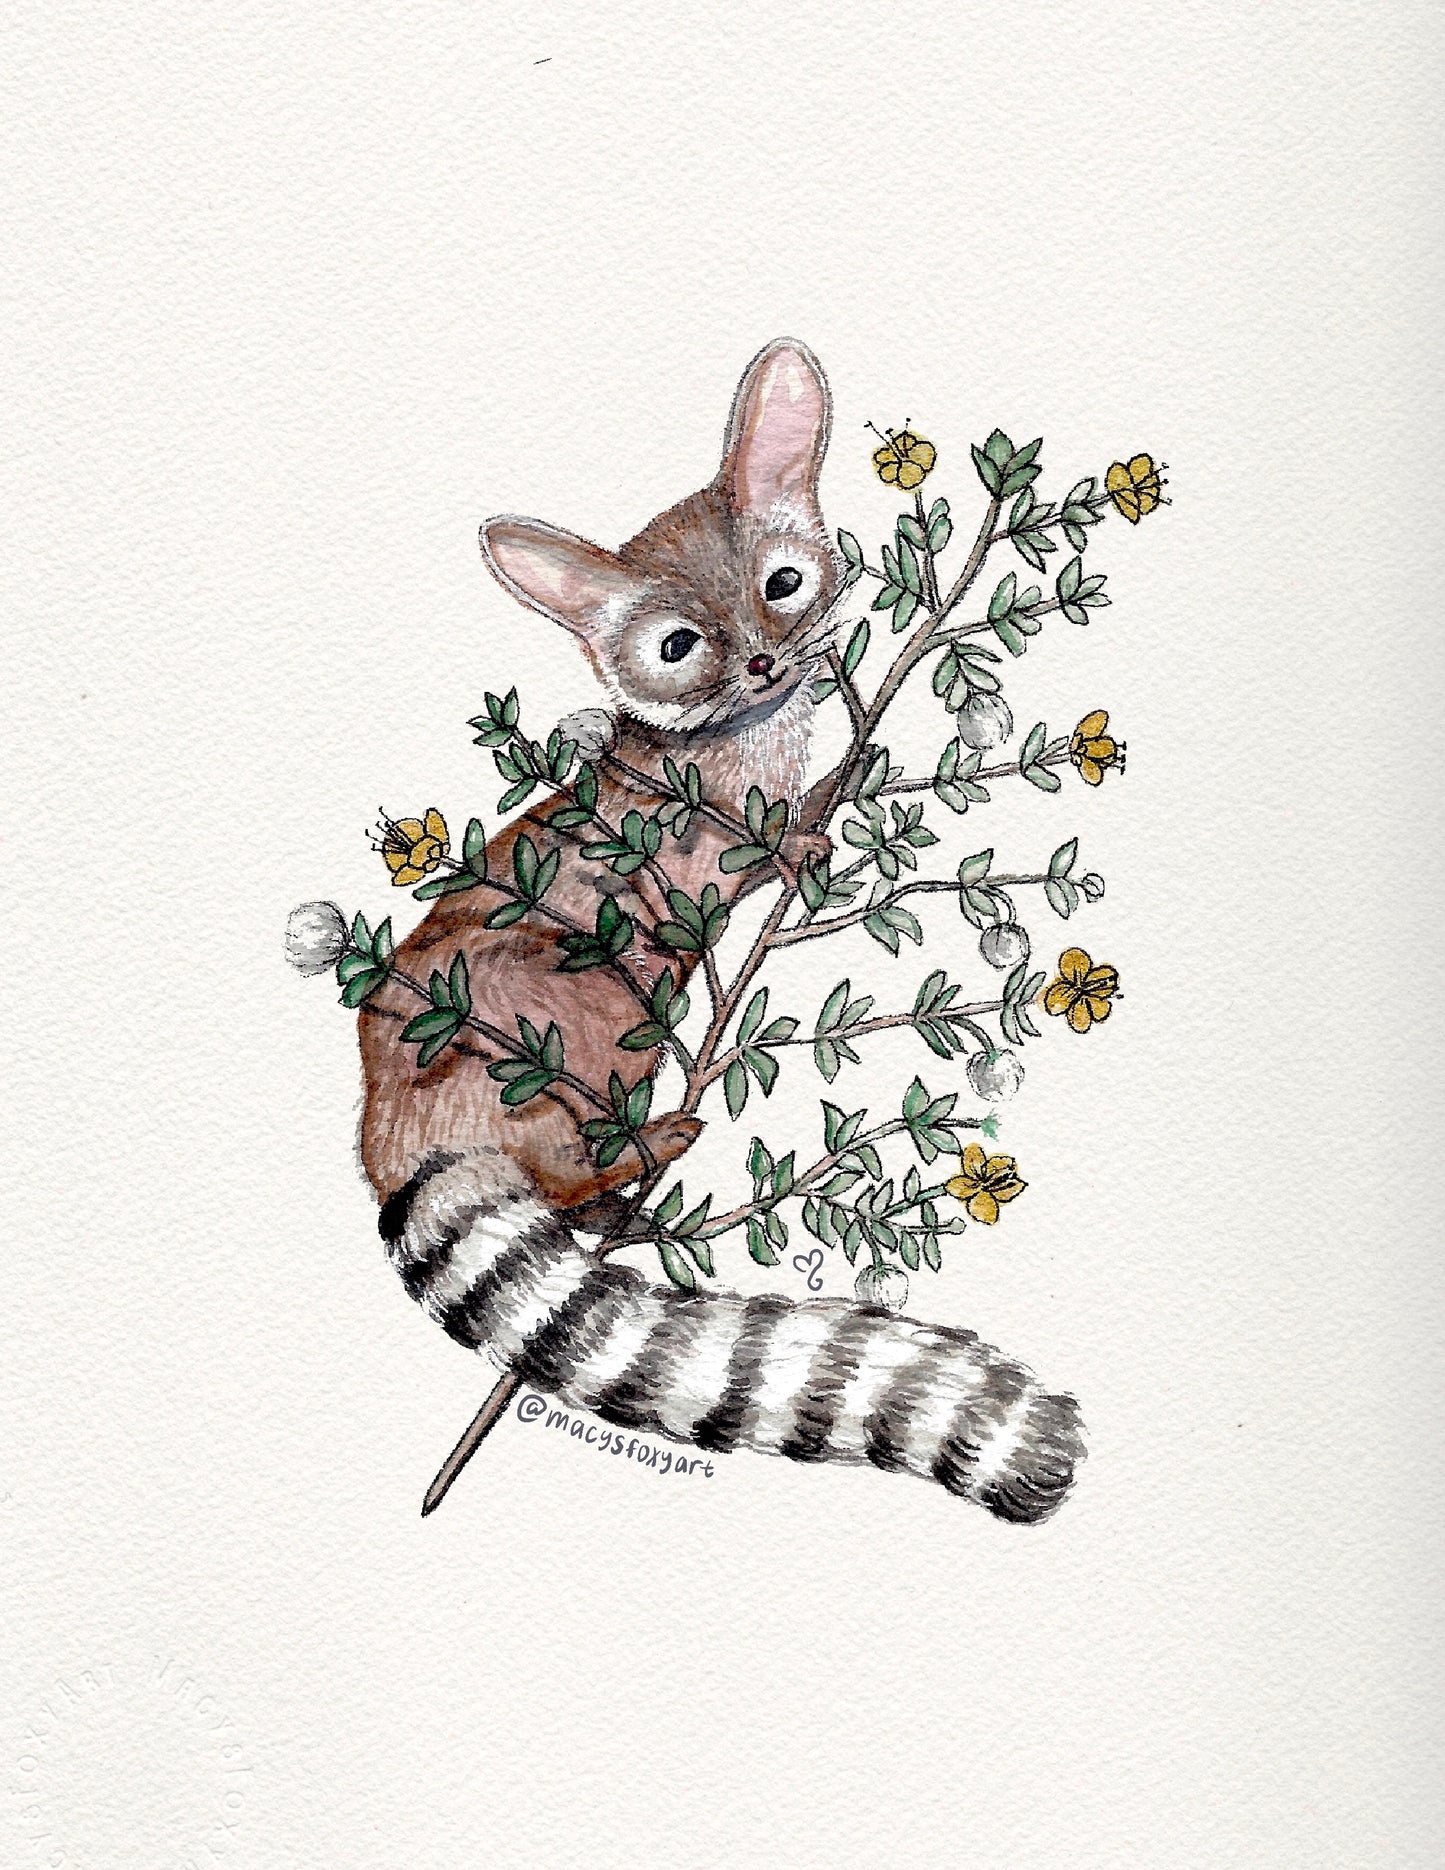 Ringtail Cat + Creosote  - Giclee fine art prints